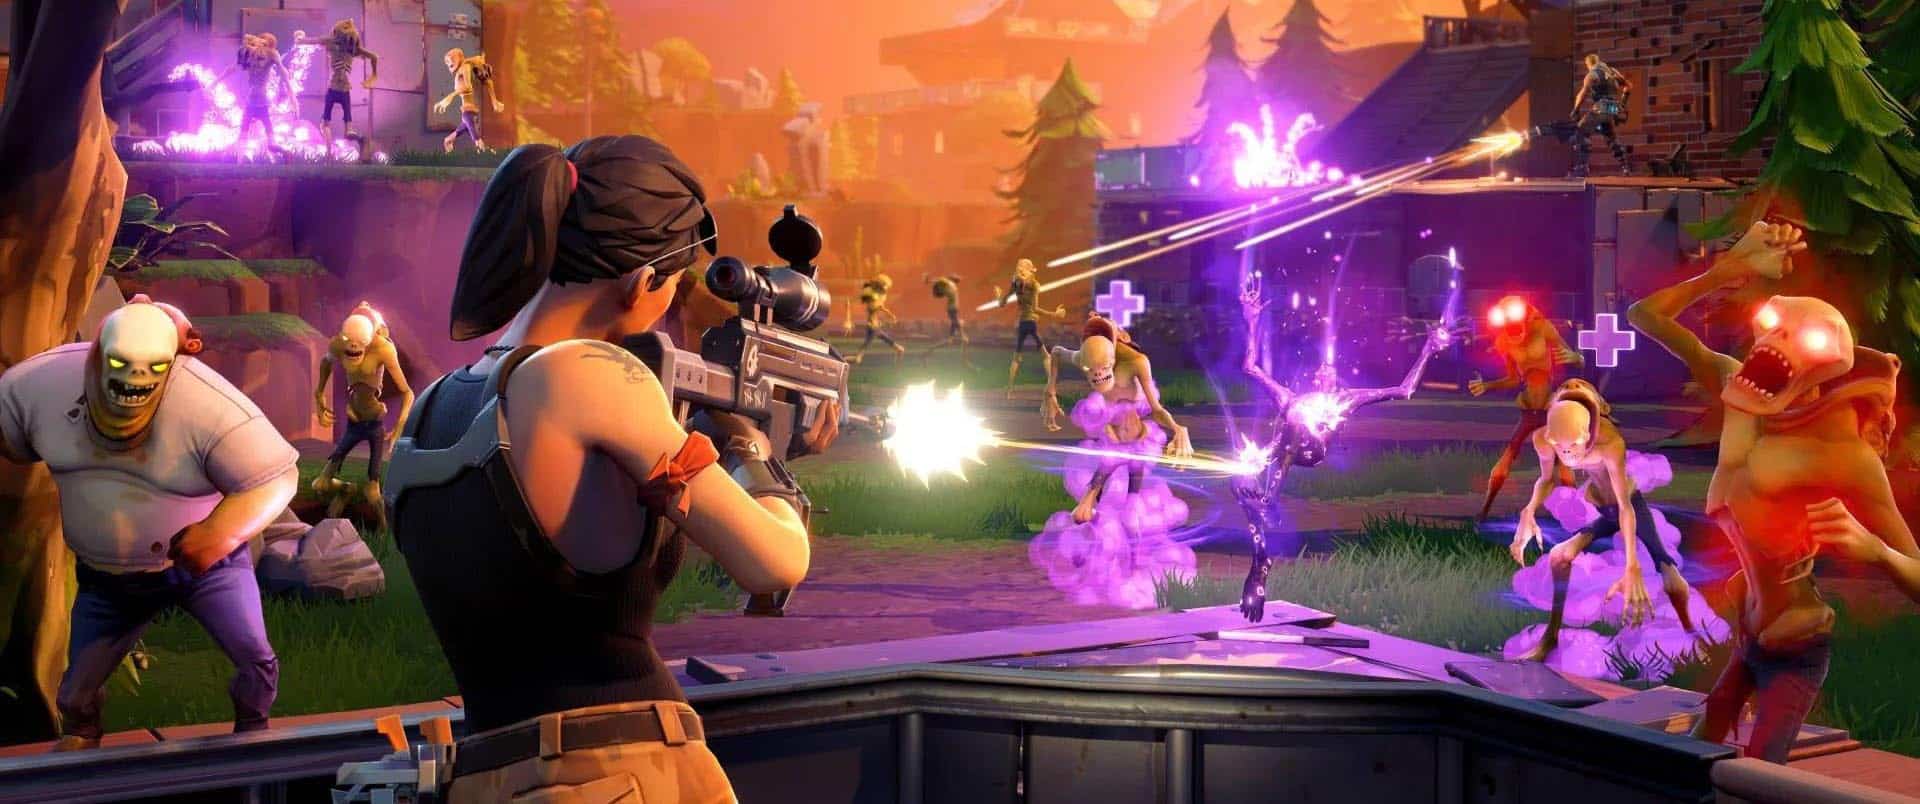 Fortnite Save The World Lack Of Updates Is Fortnite Save The World Still Worth Buying In 2021 All Pros And Cons In Depth Review